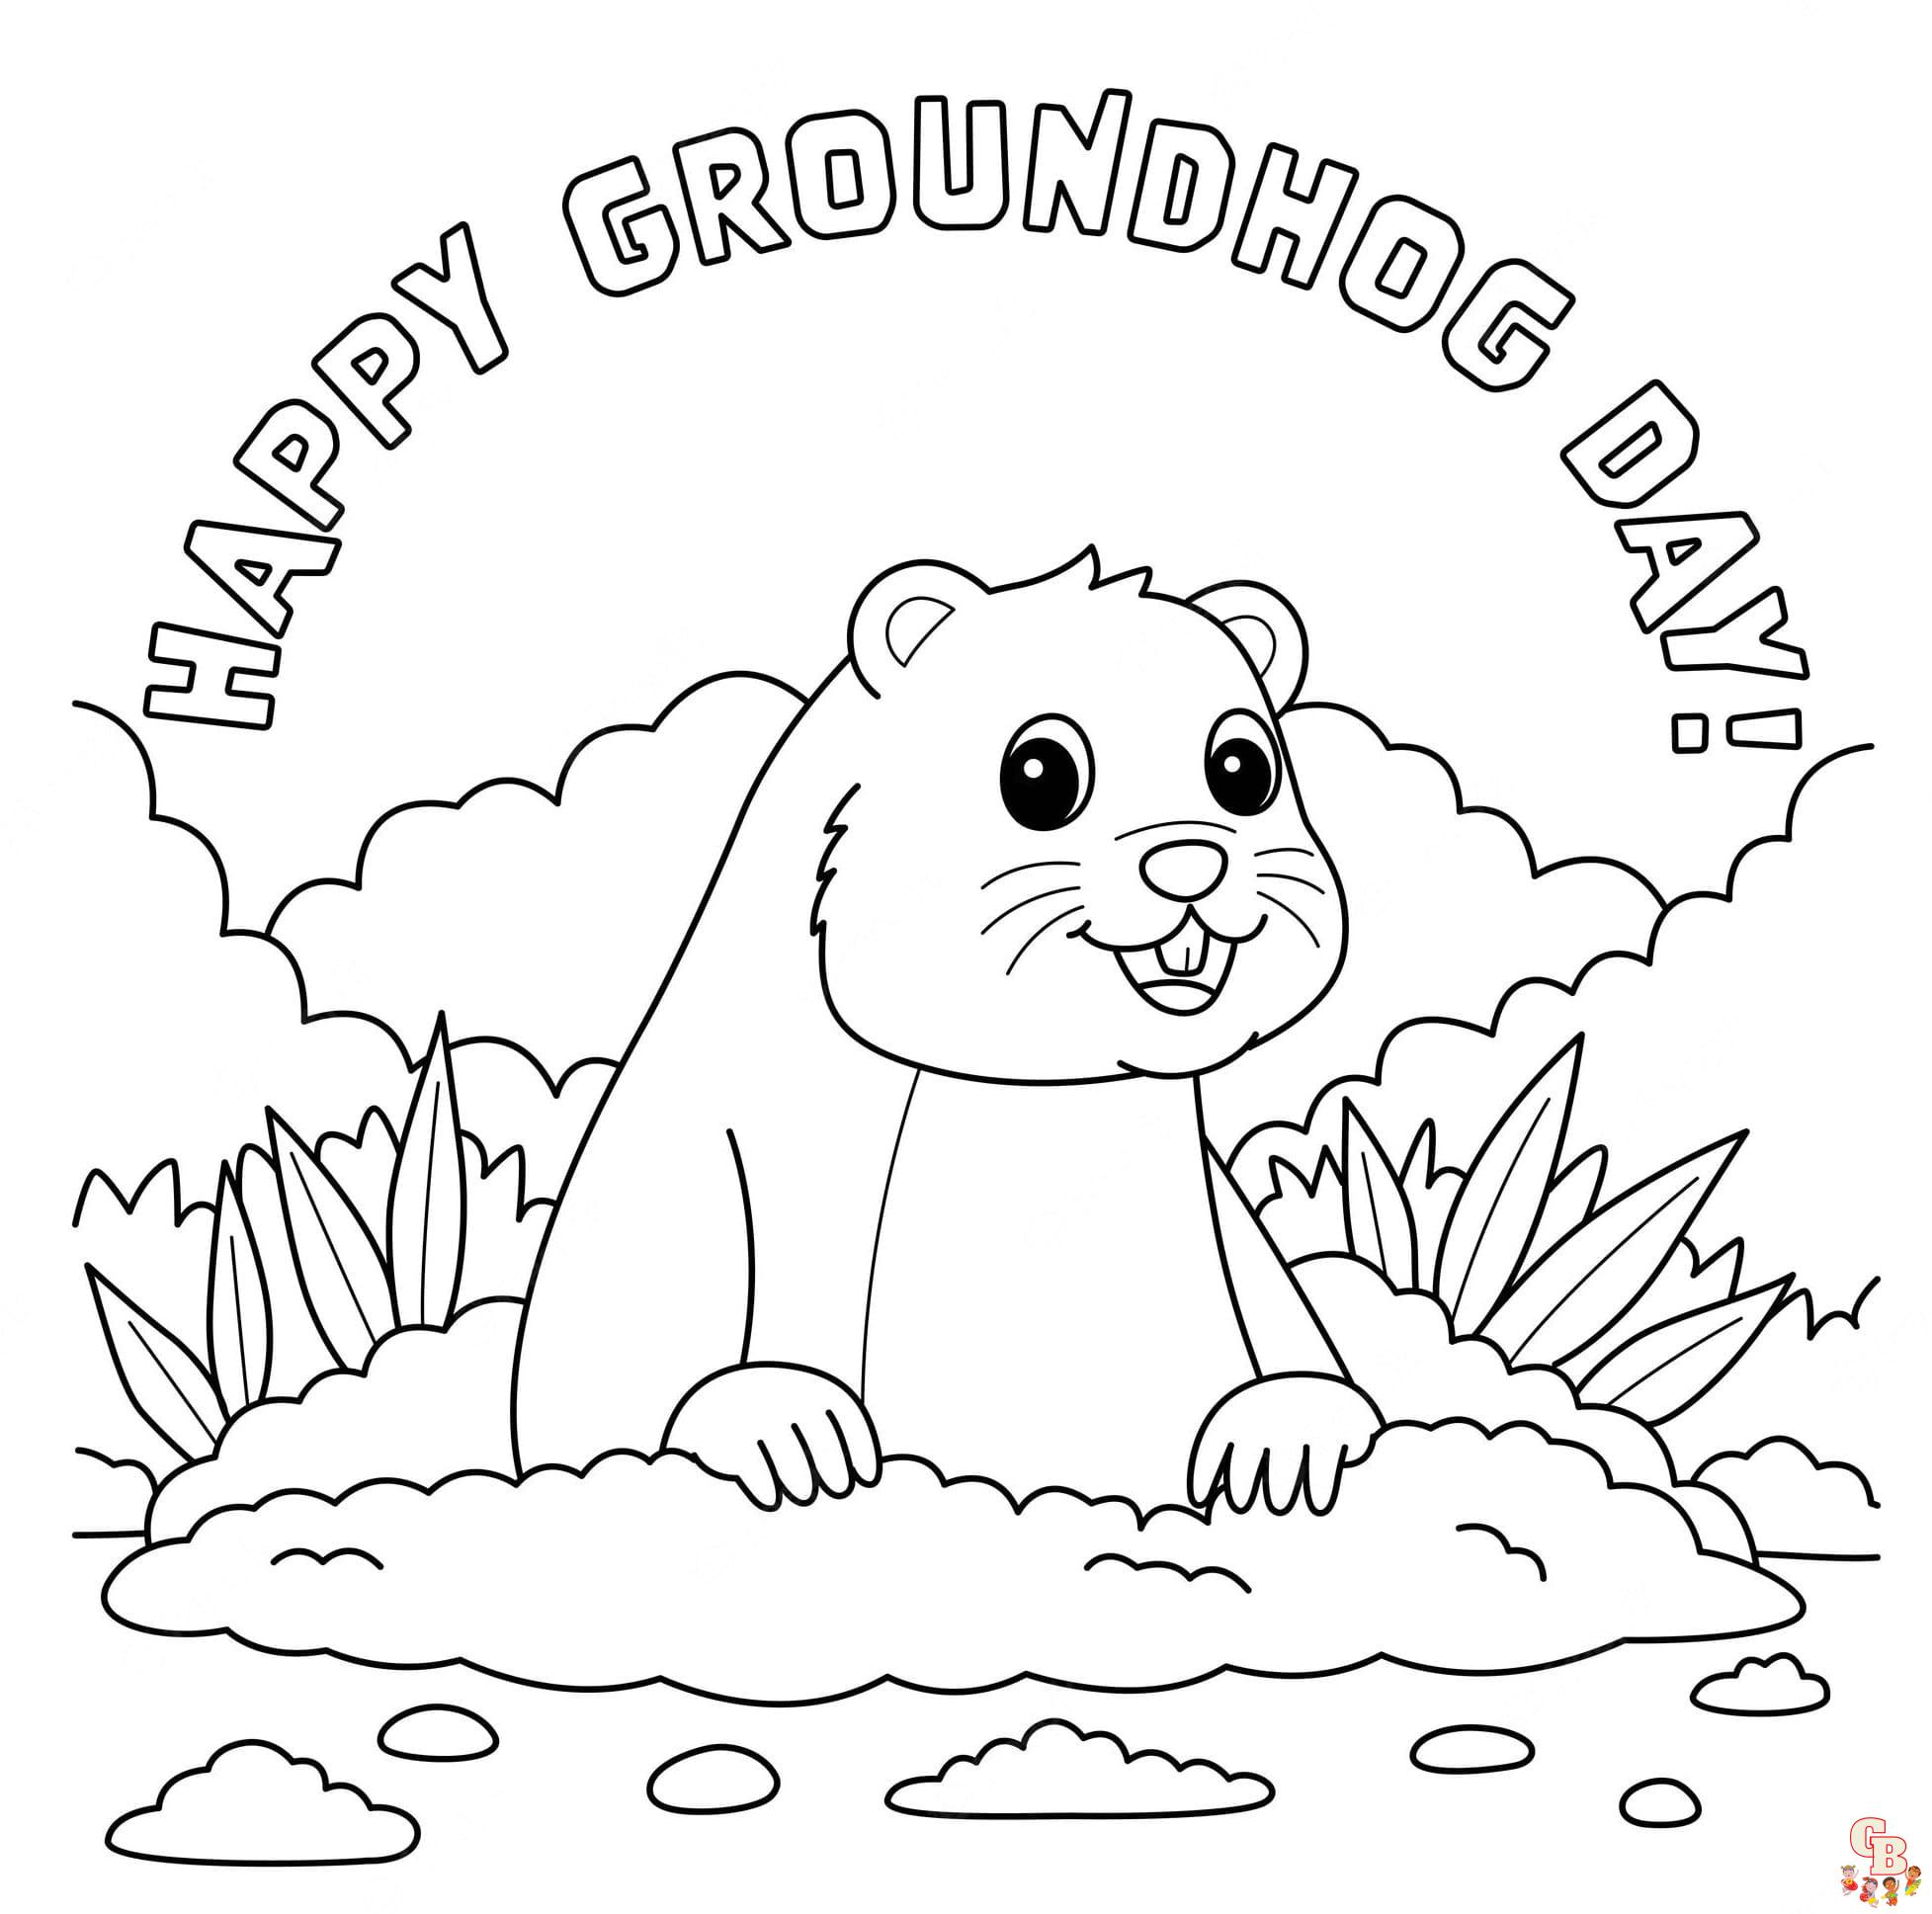 Groundhog Day Coloring Sheets